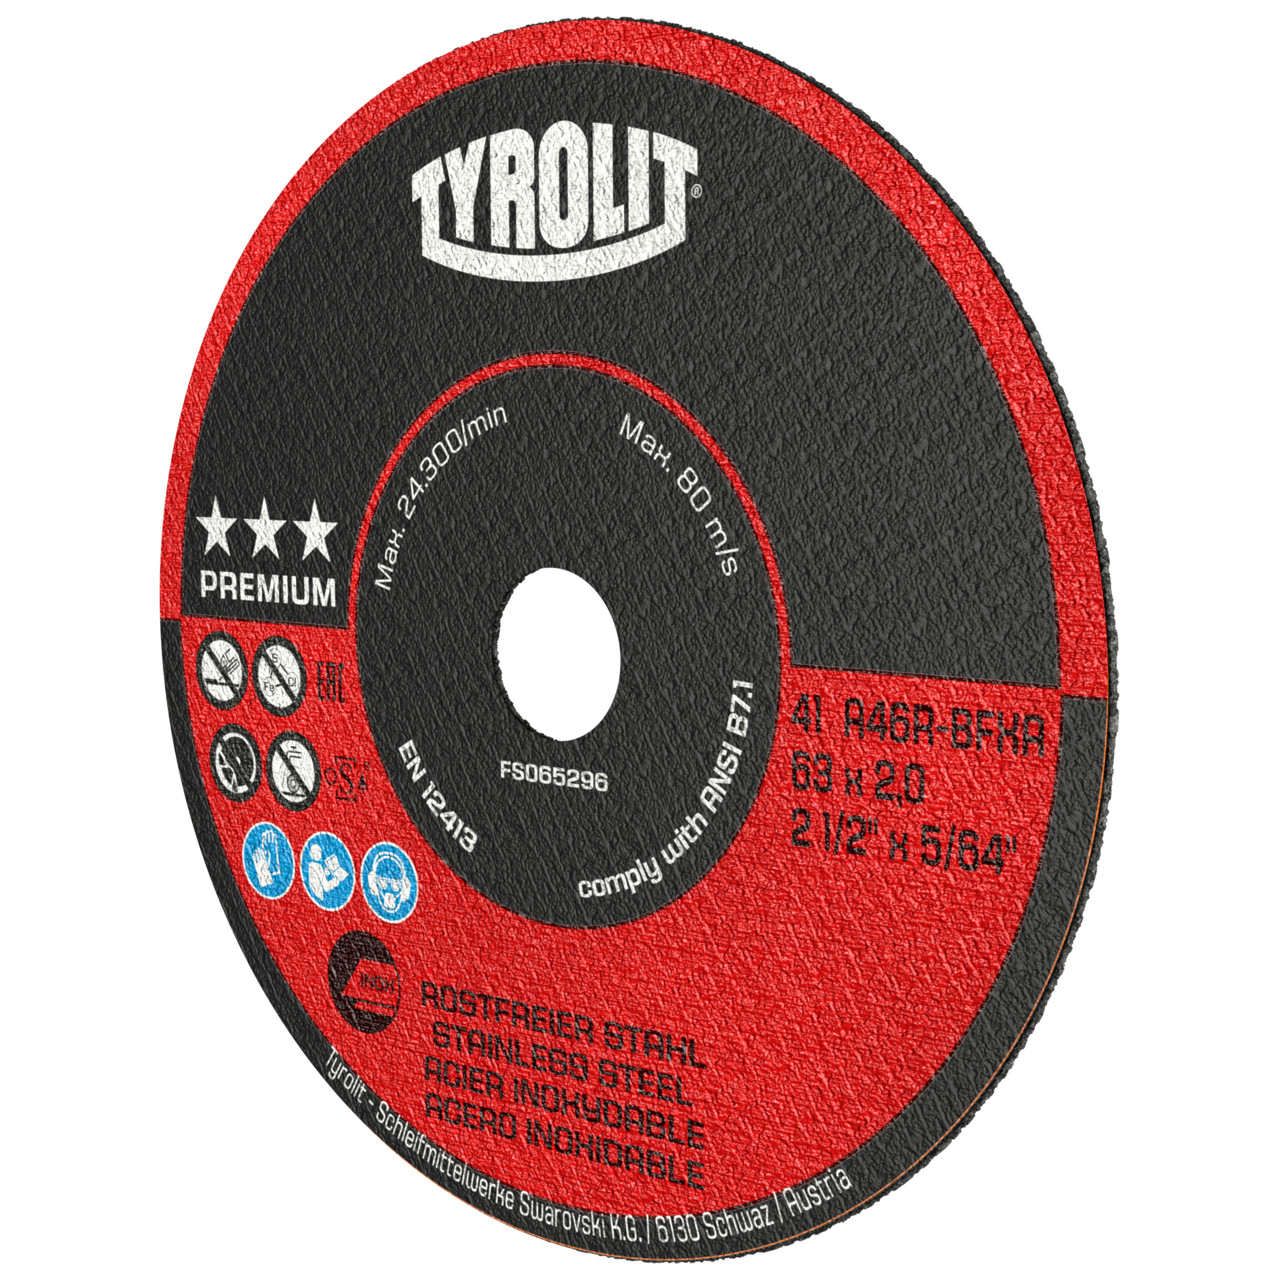 TYROLIT cut-off wheels DxDxH 63x1.6x10 For stainless steel, shape: 41 - straight version, Art. 324404